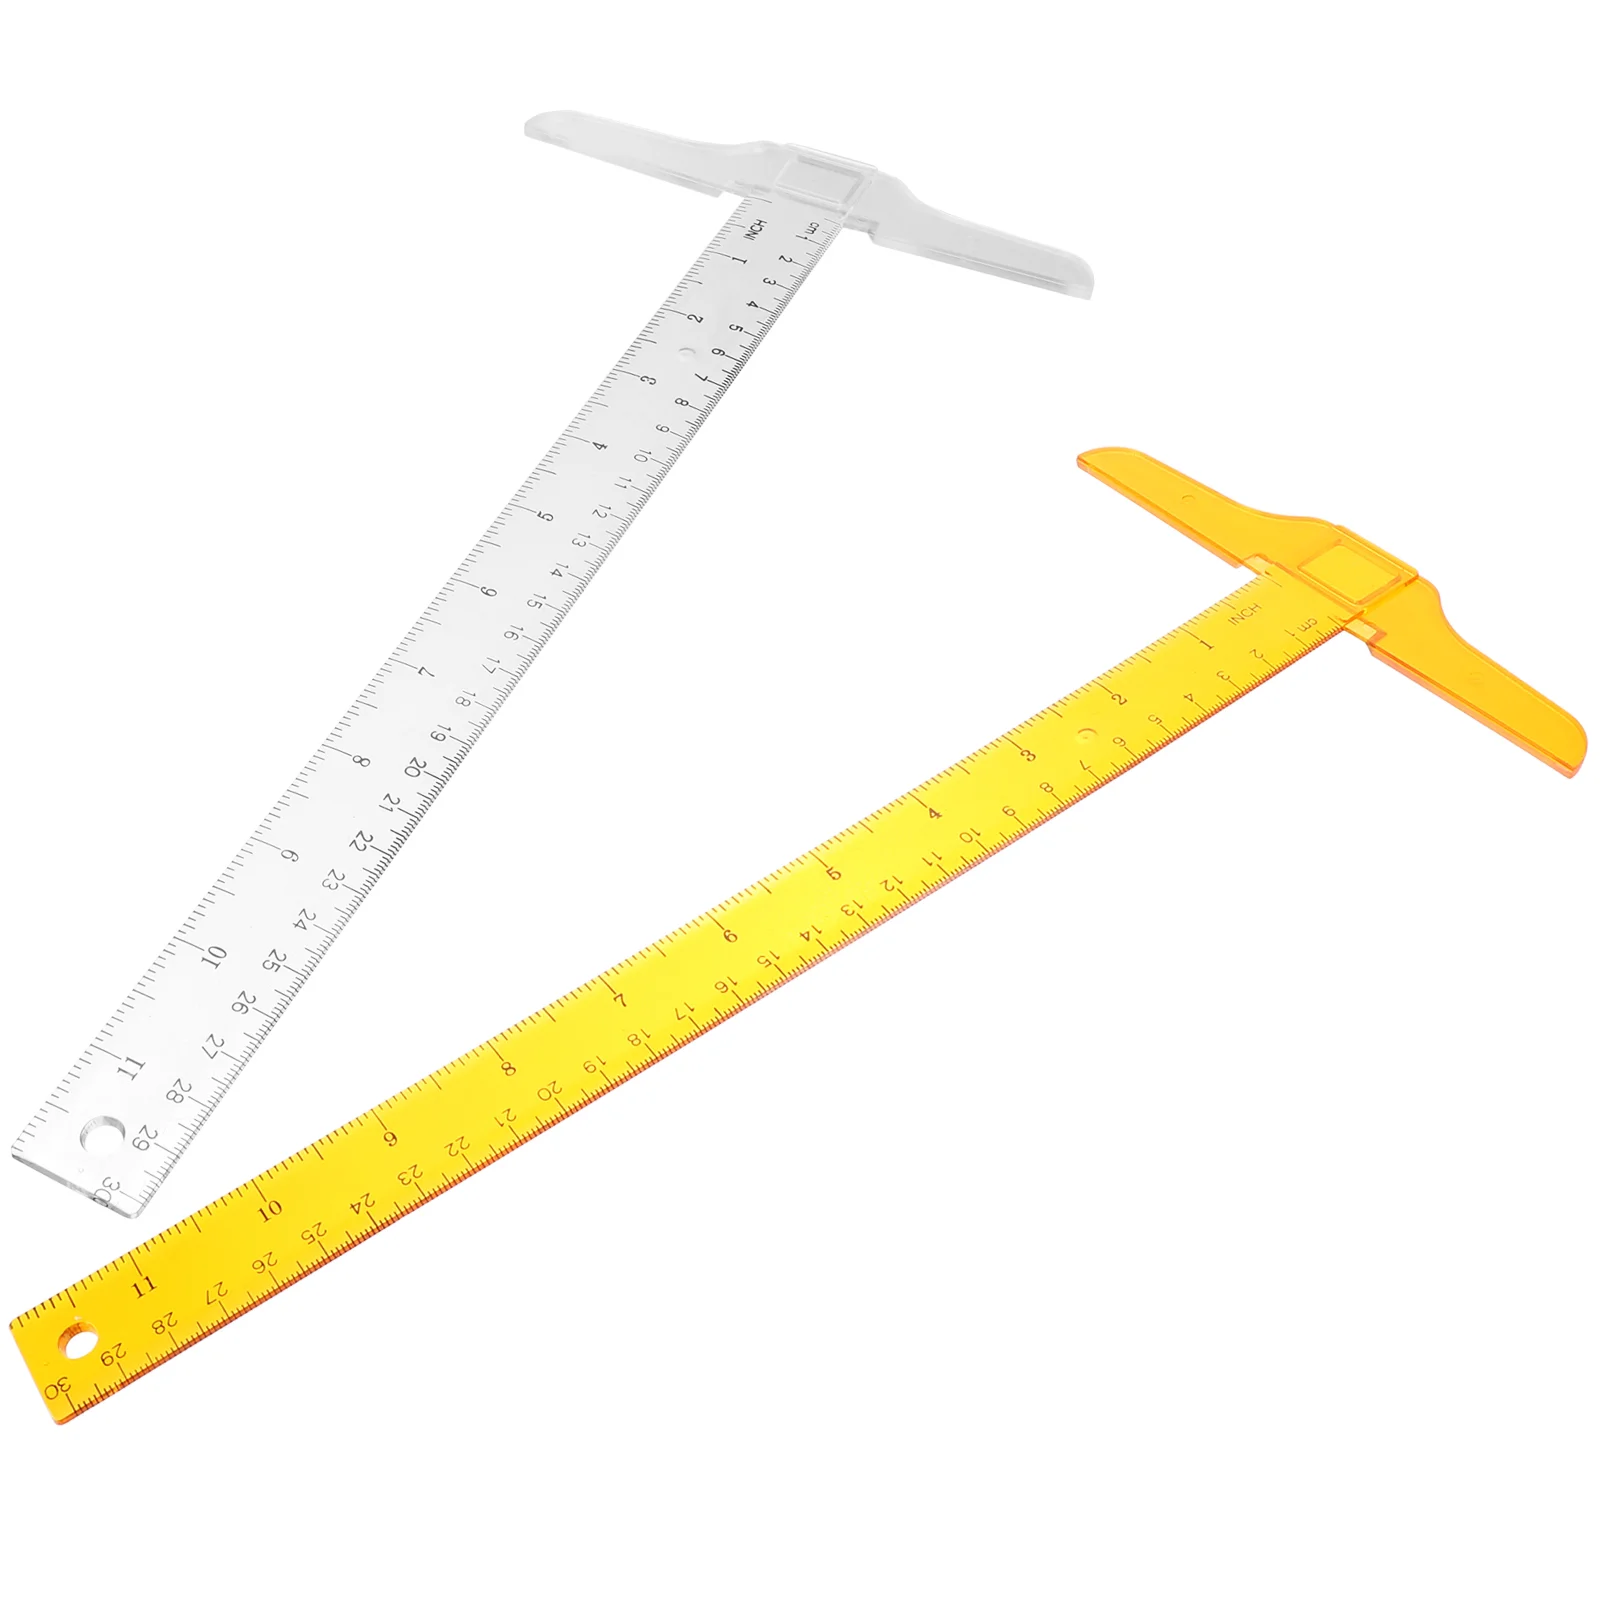 T Square Ruler Drafting Ruler Architectural Triangle Tee Ruler 2 Pcs  Drafting Tools Supplies 2 Pcs - AliExpress